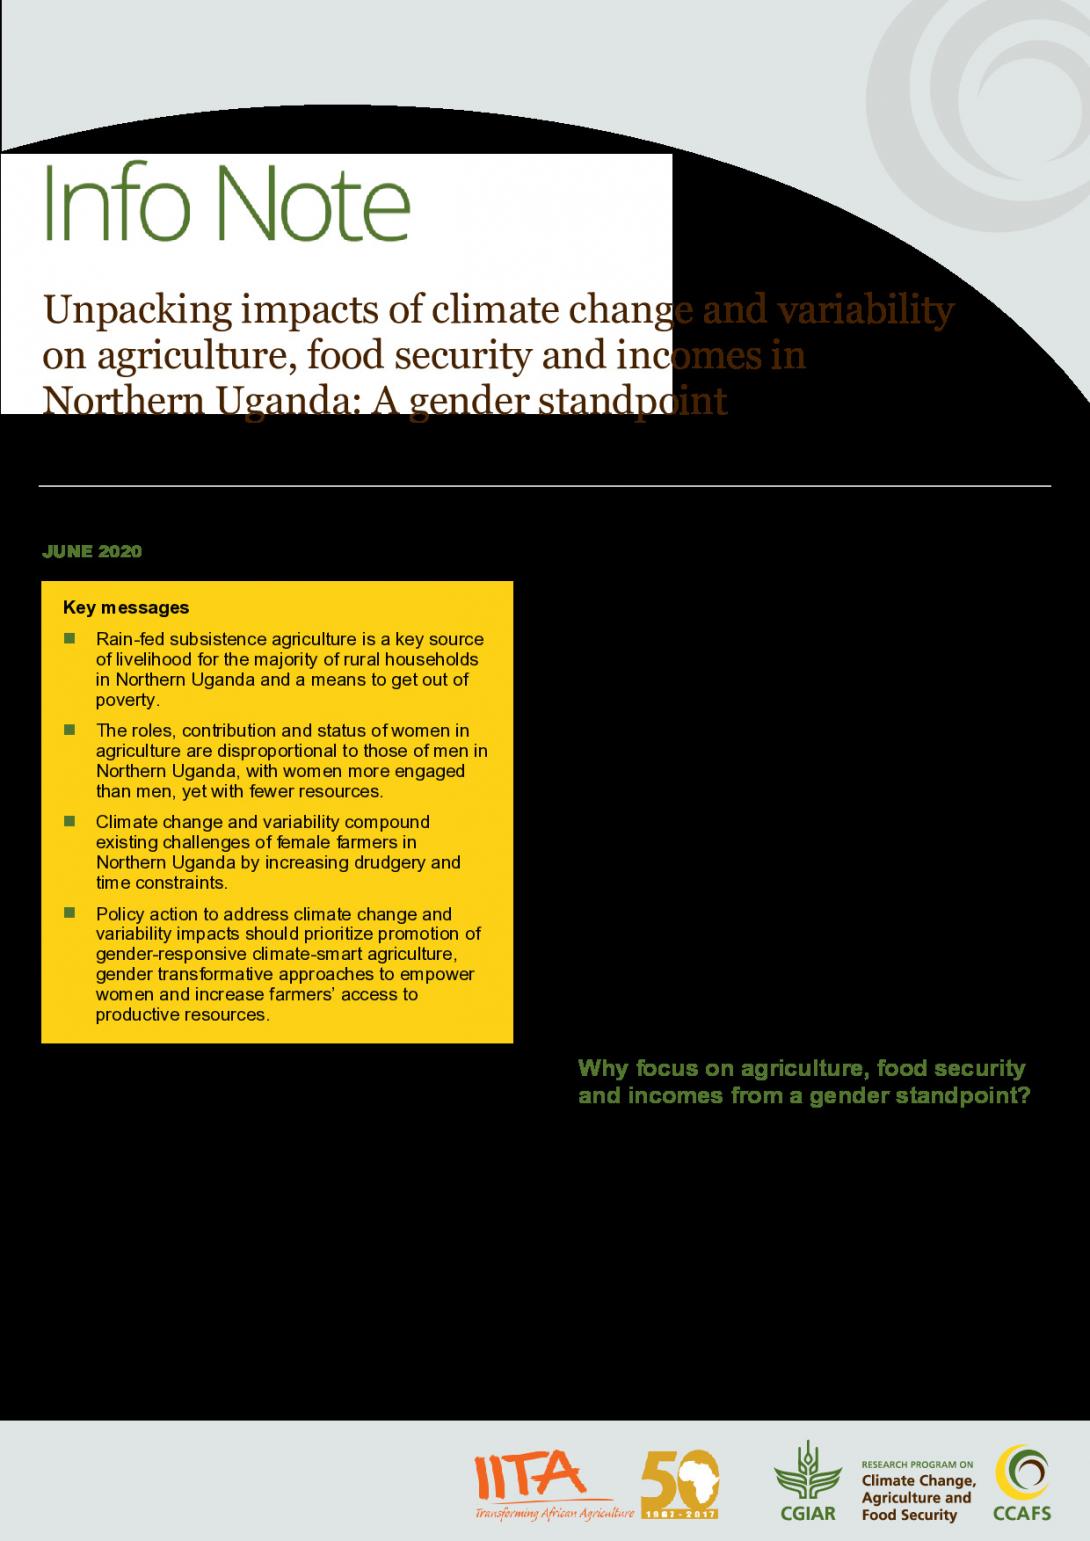 Unpacking impacts of climate change and variability on agriculture, food security and incomes in Northern Uganda: A gender standpoint